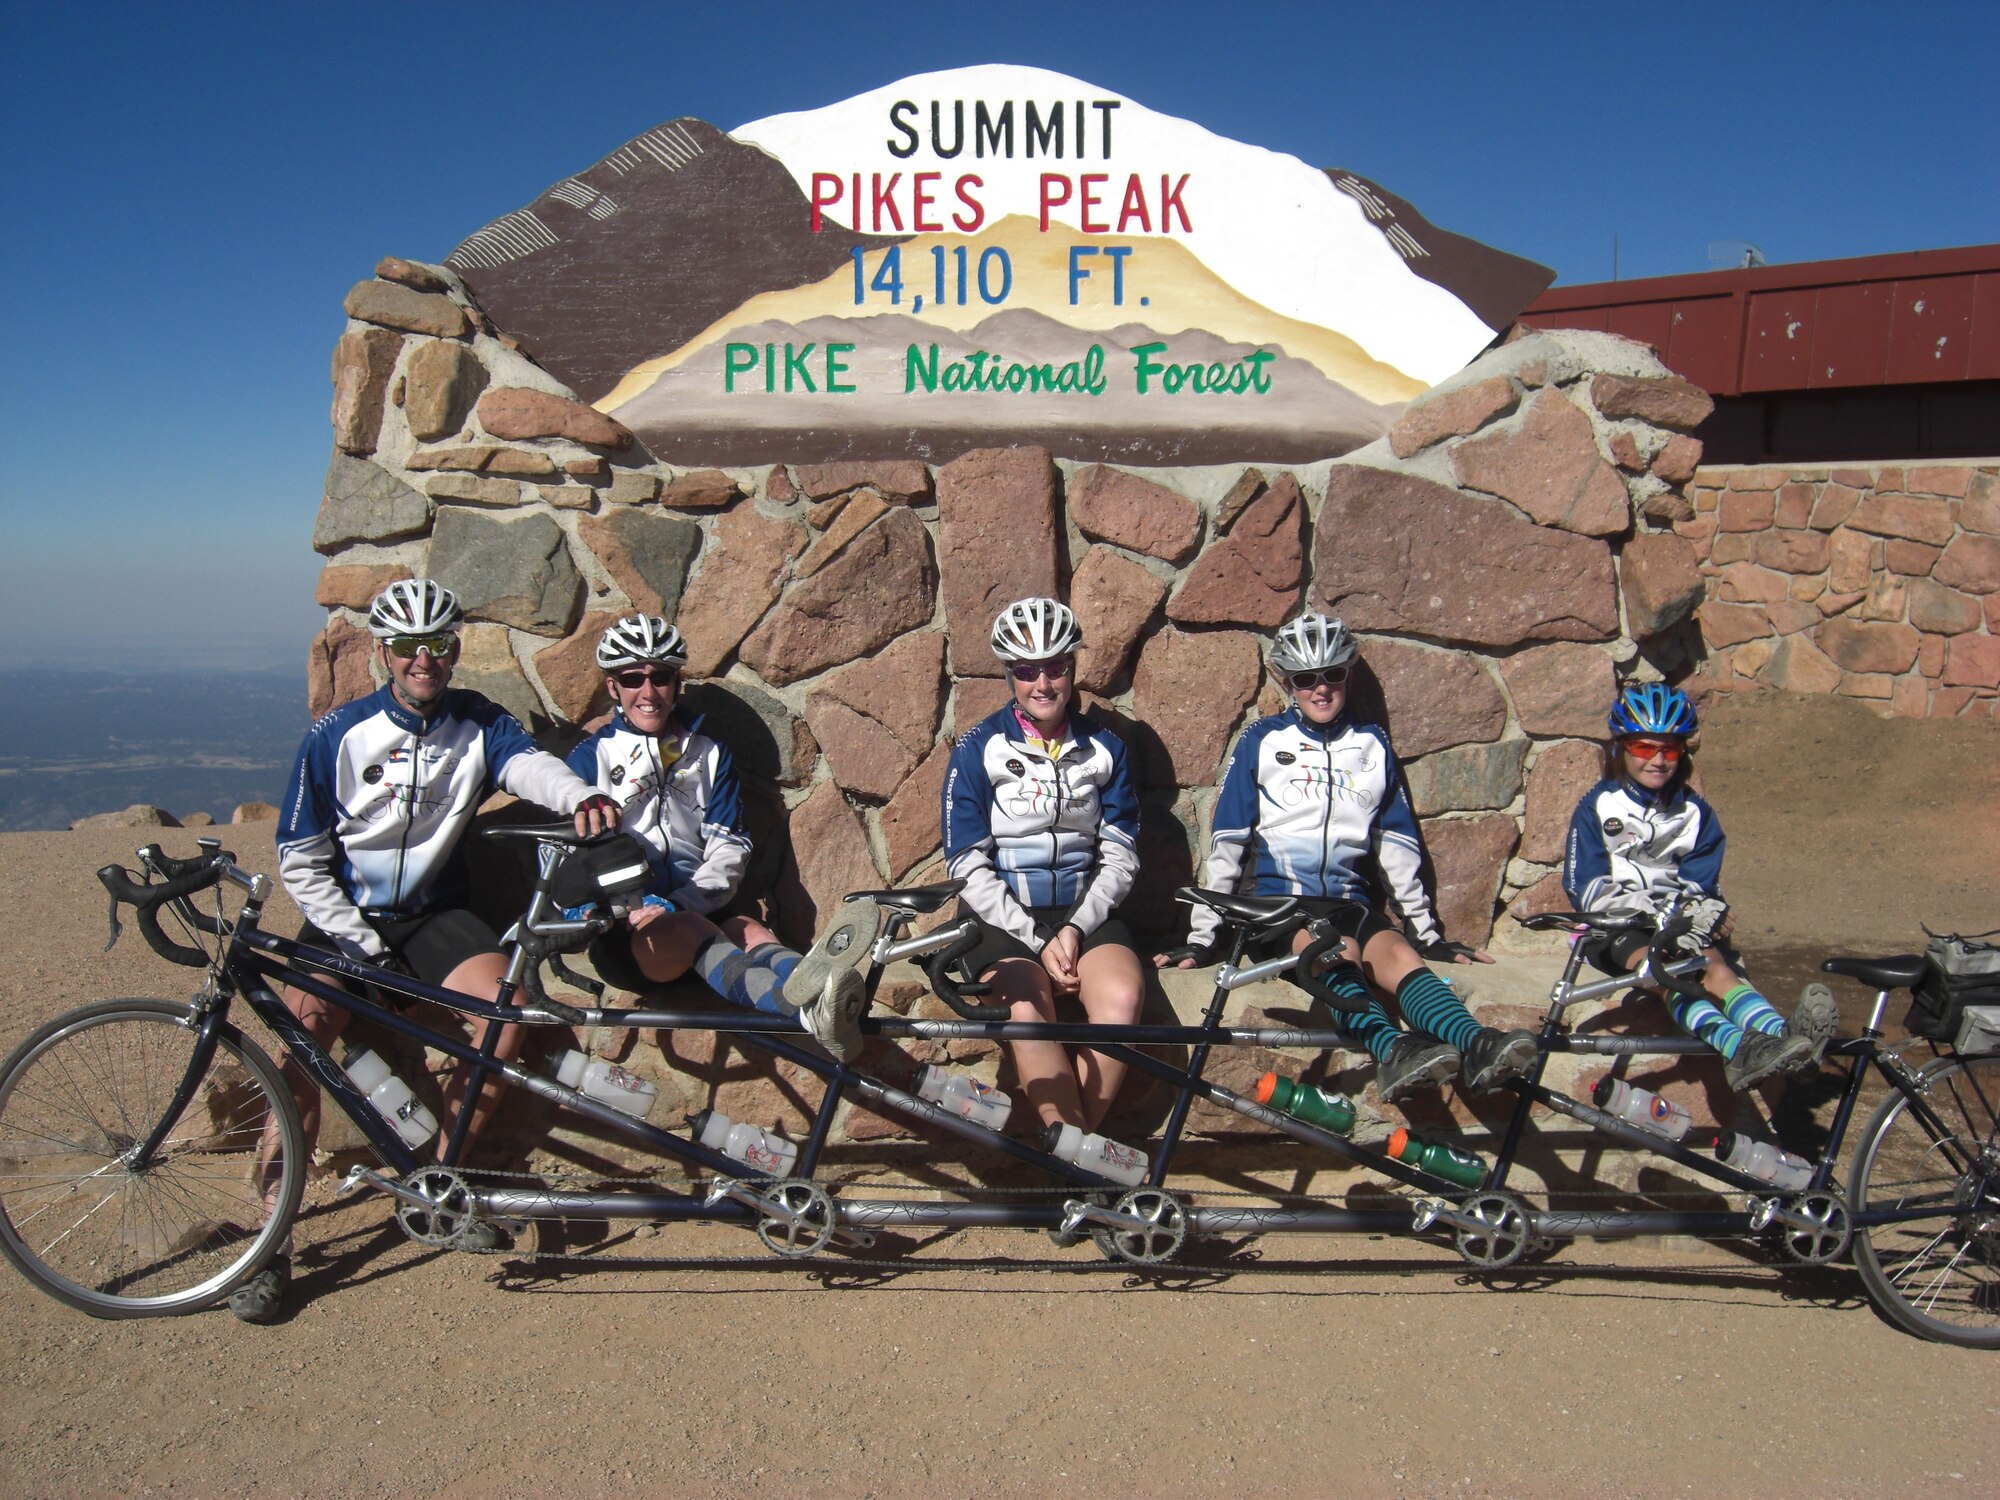 PETERSON AIR FORCE BASE, Colo.—Lt. Col. James Lawrence, a pilot with the 200th Airlift Squadron Colorado Air National Guard, and his family take a well-deserved rest at the summit of Pikes Peak after pedaling their way up on the family’s “quint” bicycle. For the Lawrence family, riding bikes of all shapes and sizes has become a passion. (Courtesy photo)